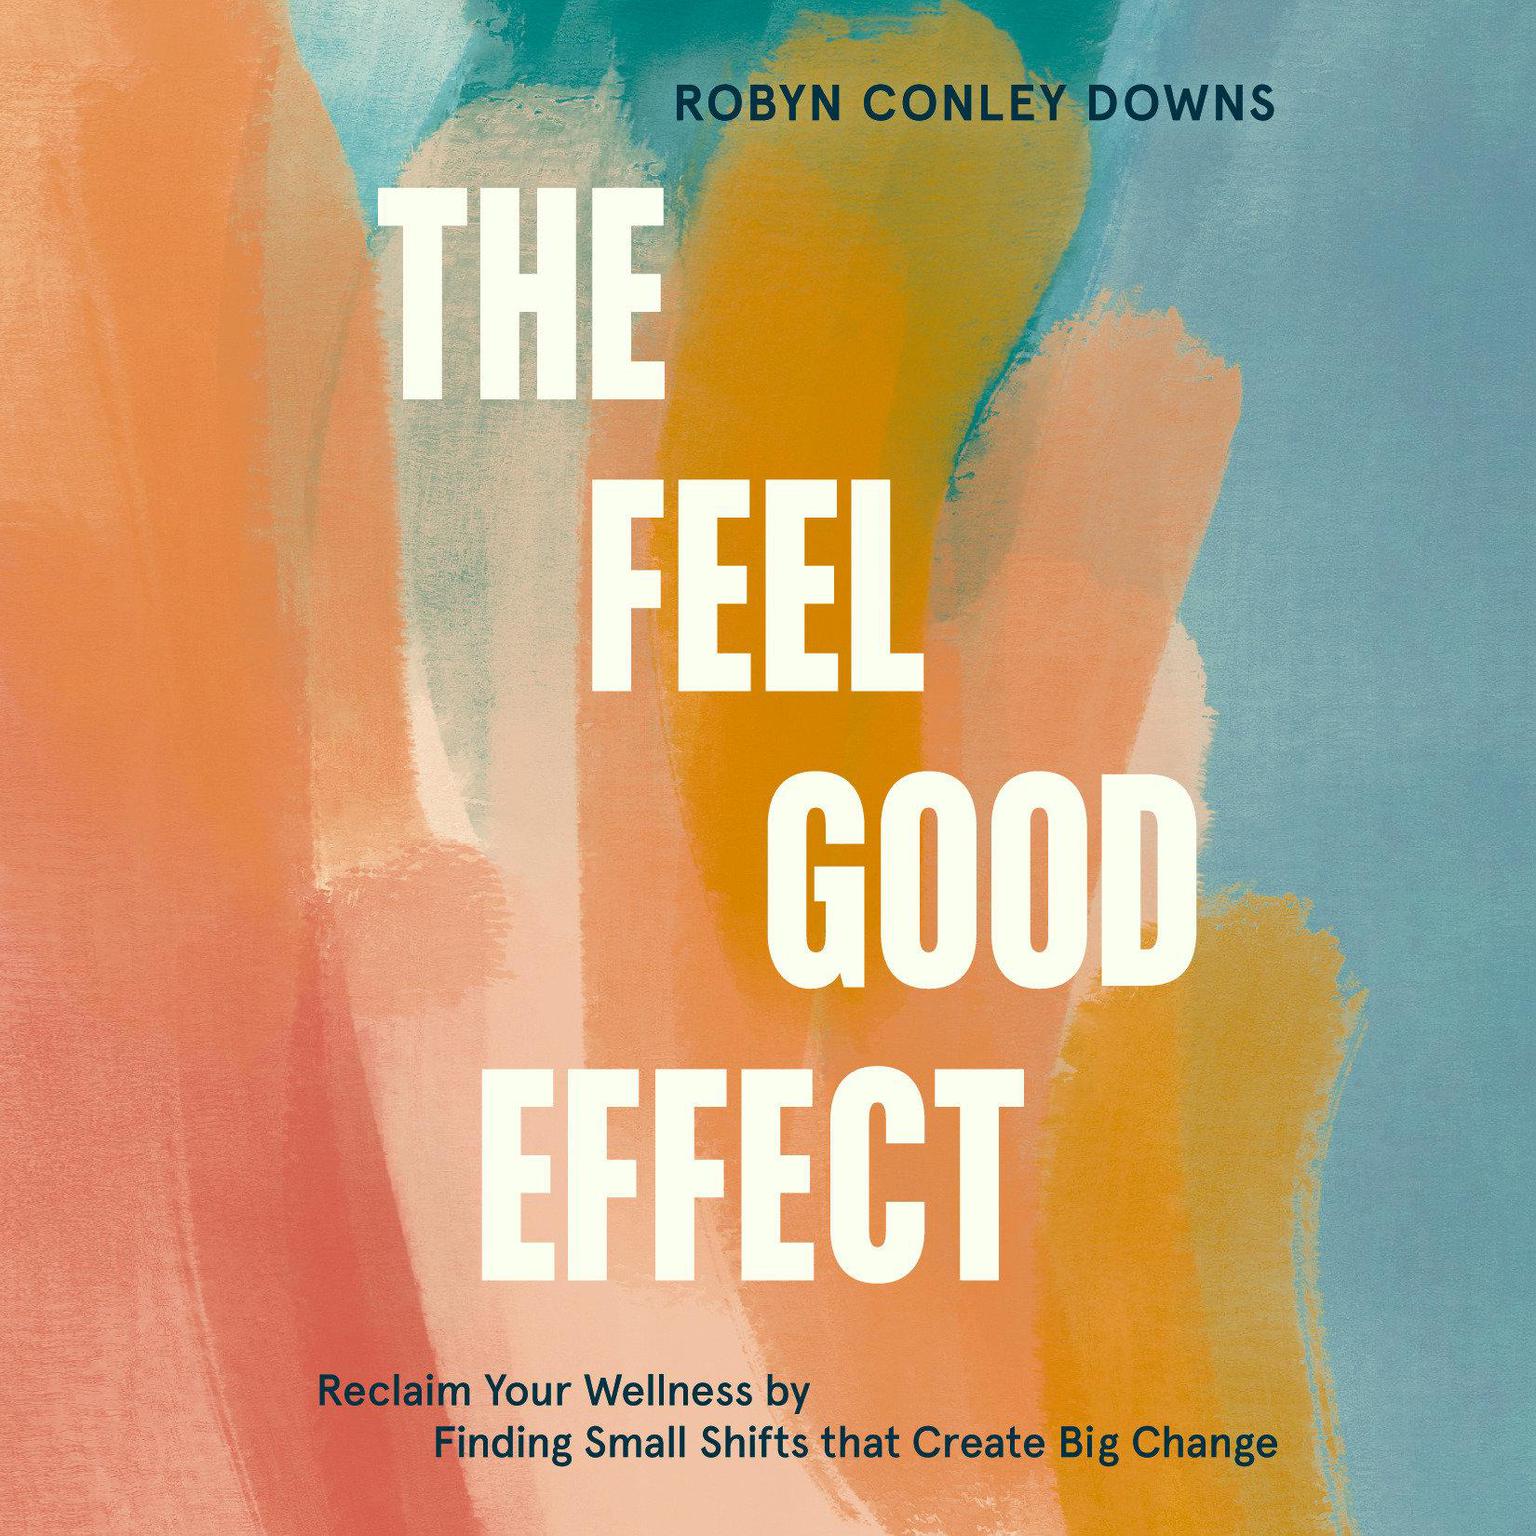 The Feel Good Effect: Reclaim Your Wellness by Finding Small Shifts that Create Big Change Audiobook, by Robyn Conley Downs